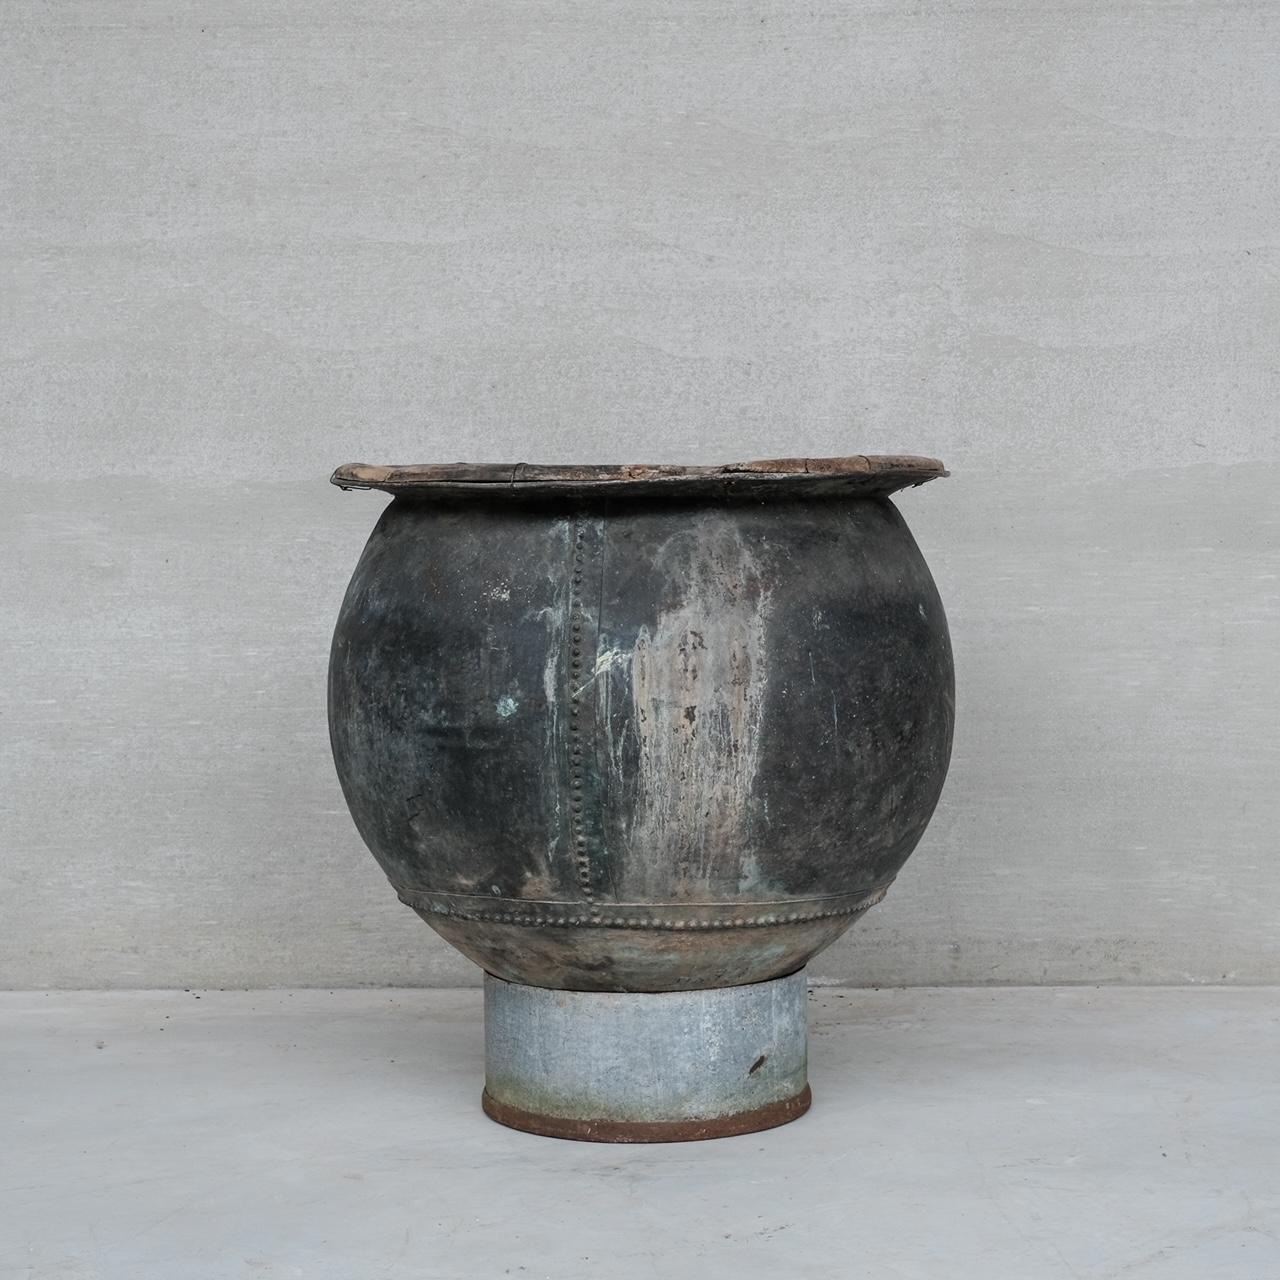 An impressive early 20th century riveted vat or planter. 

Unusual wooden surround to the top adds character. 

France, c1920s. 

Later addition of a ciruclar metal base to provide support but this could be removed as it is not joined, if the